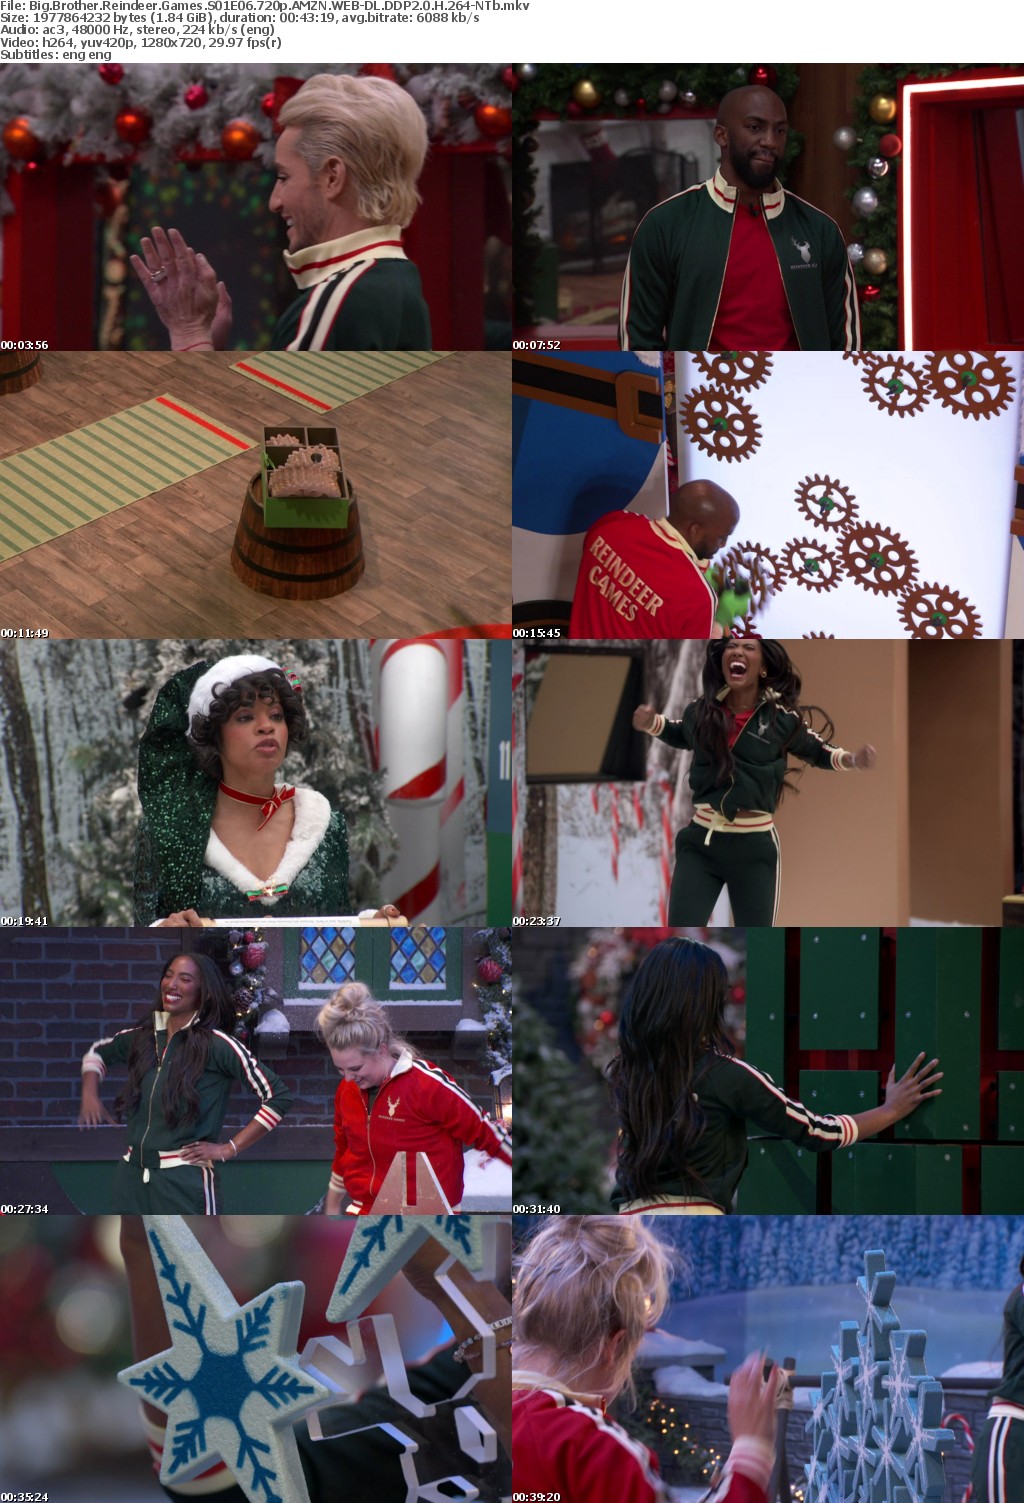 Big Brother Reindeer Games S01E06 720p AMZN WEB-DL DDP2 0 H 264-NTb